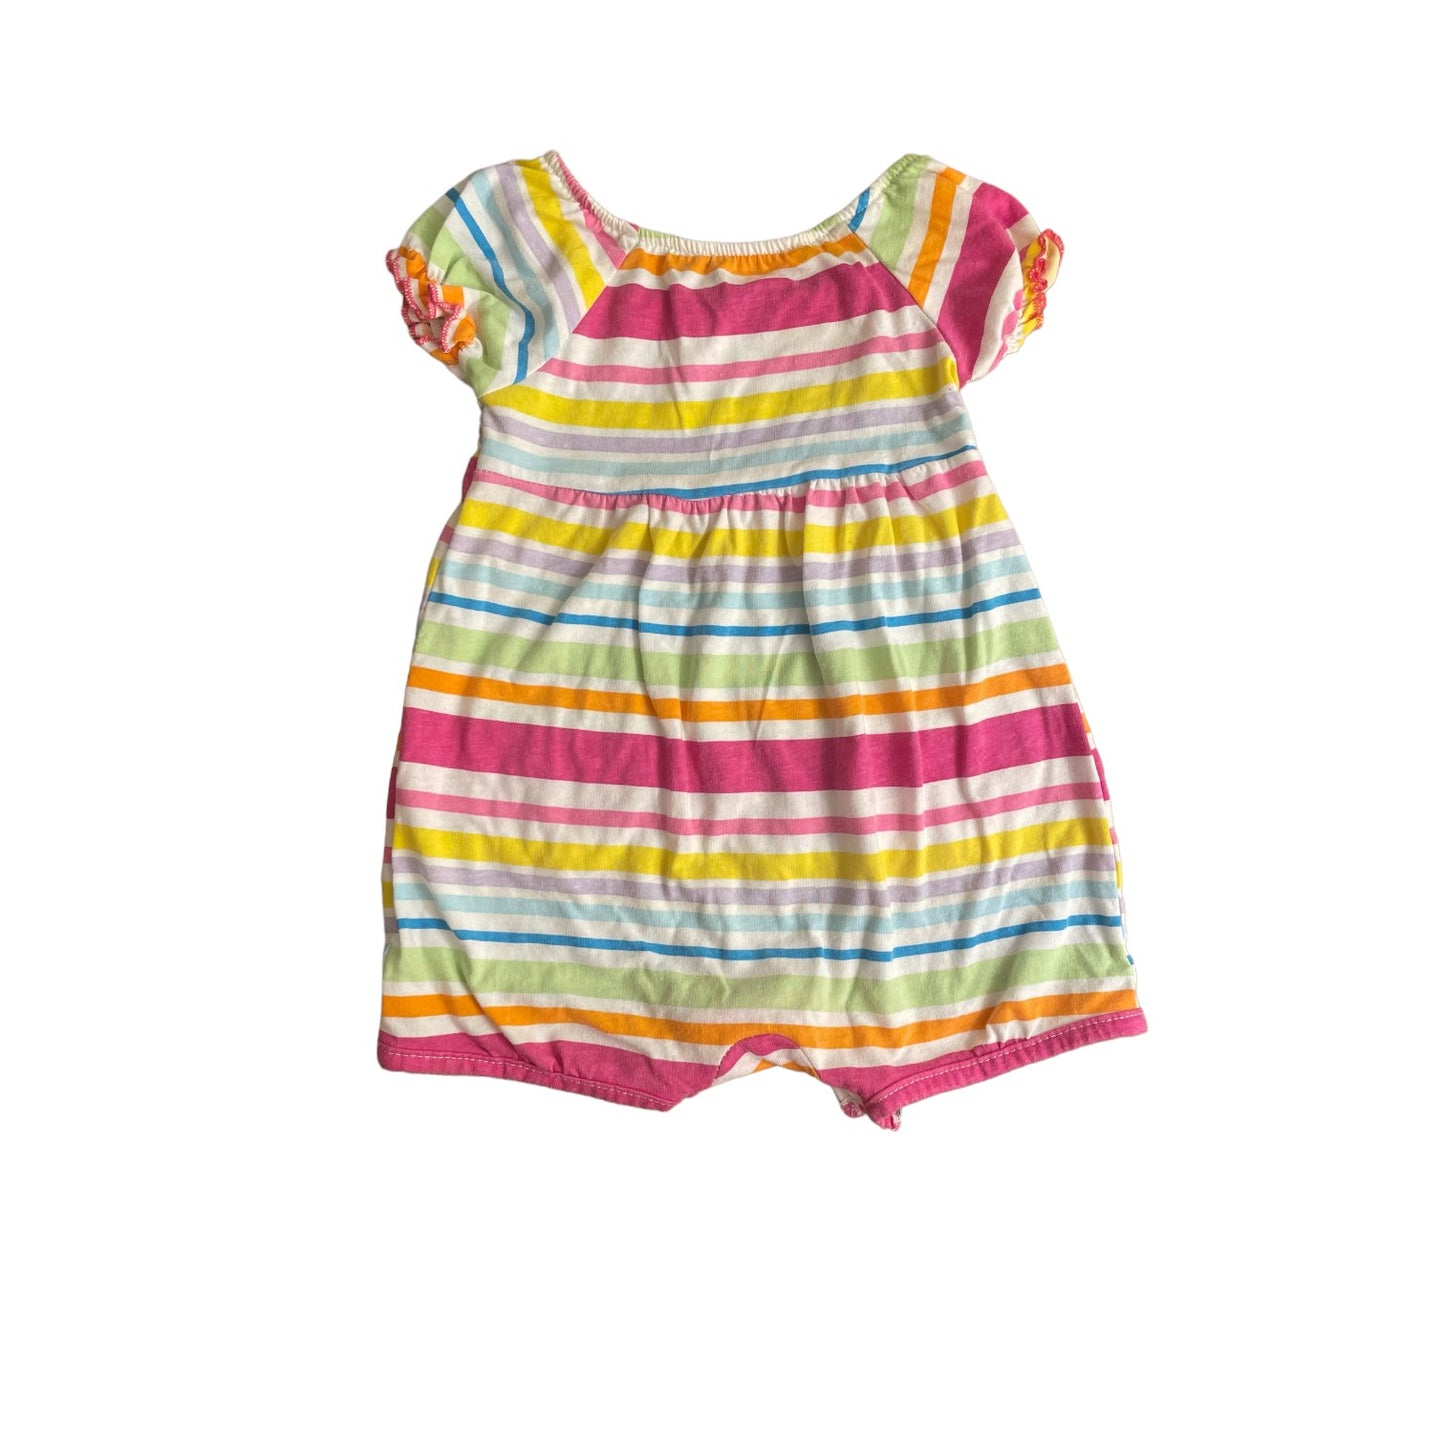 Faded Glory Girls Infant Dress Size 3-6 months